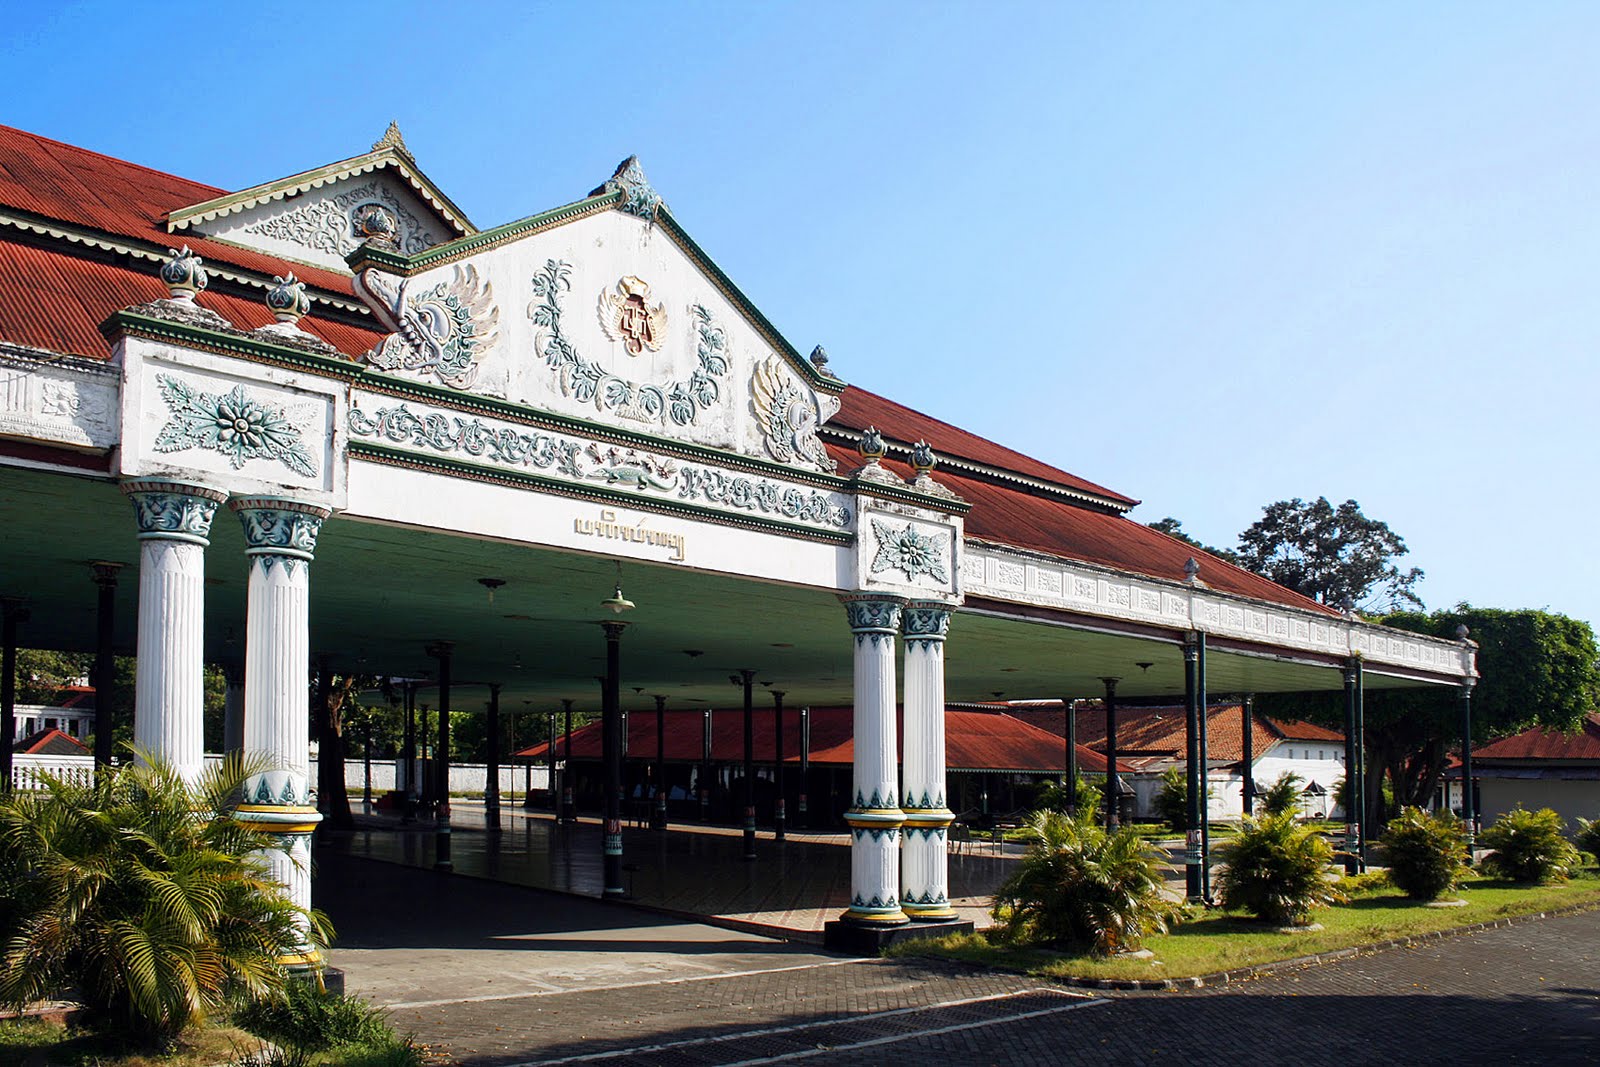  The image shows the Keraton Yogyakarta palace in Java, Indonesia, which is a complex of palaces and pavilions built in the Javanese architectural style.